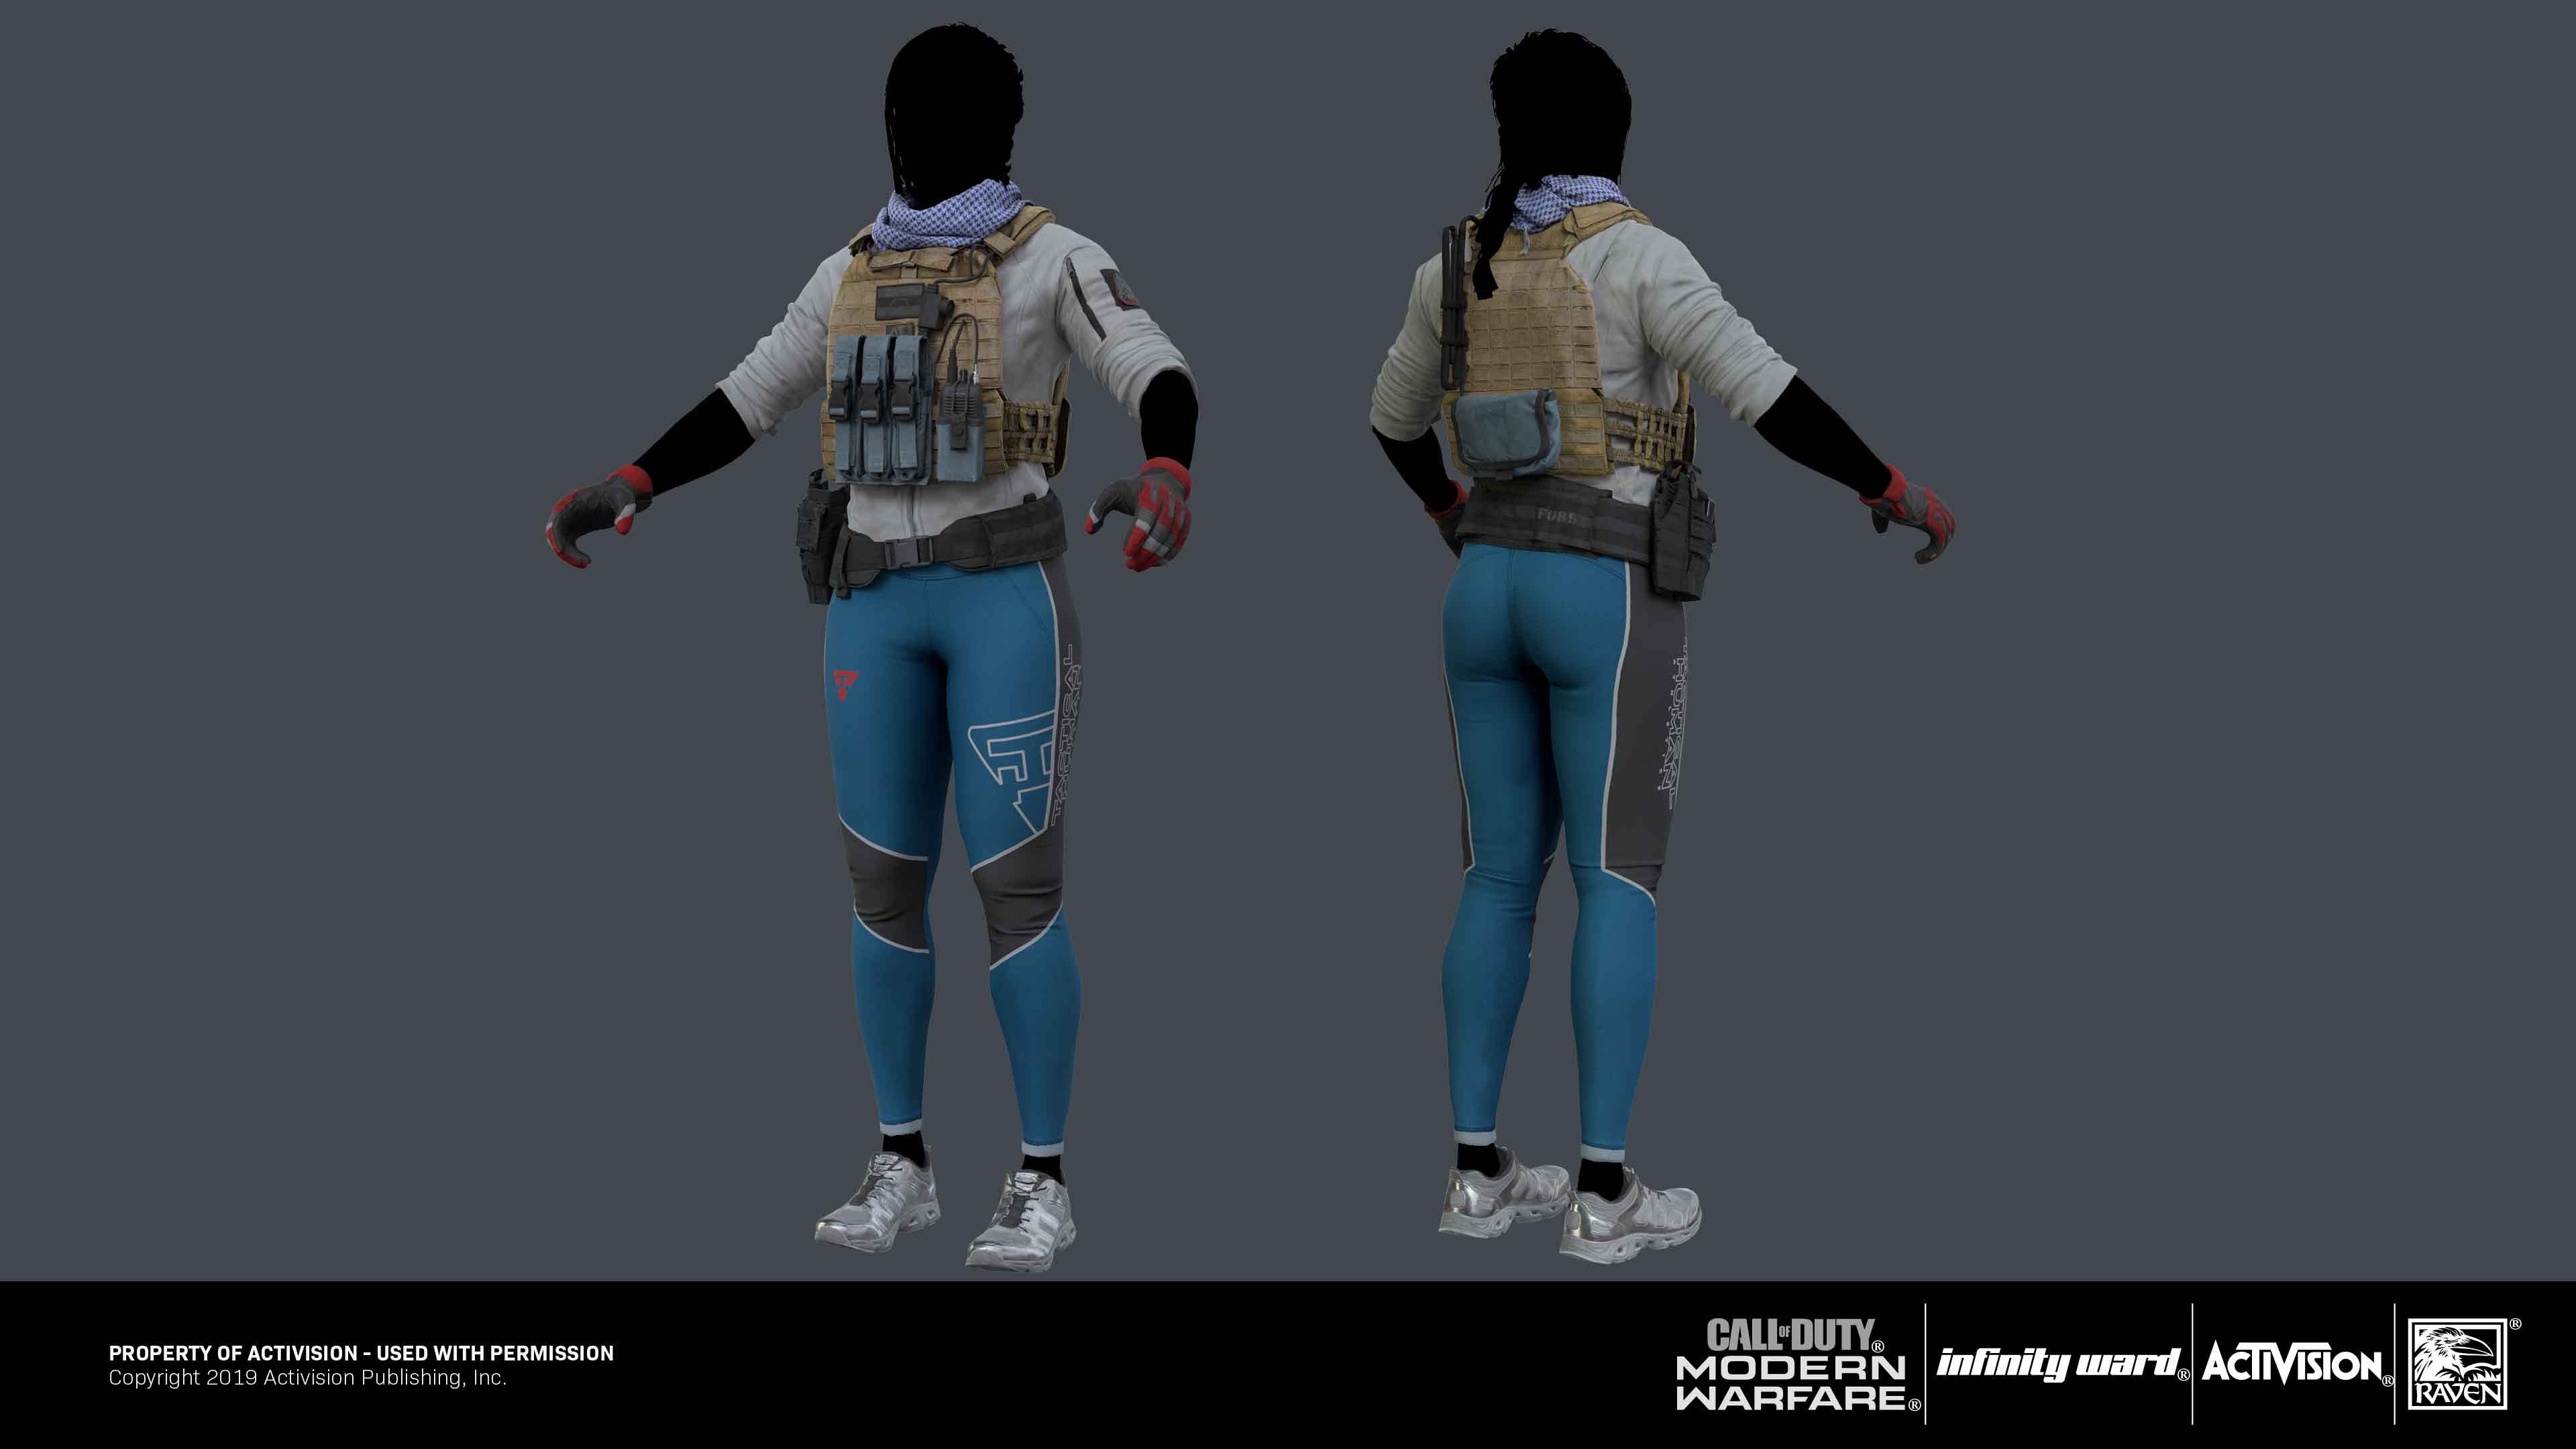 Zedra skin 2: Responsible for modifying and re-texturing for existing parts to create skins. (Existing parts used were created by various Artist)